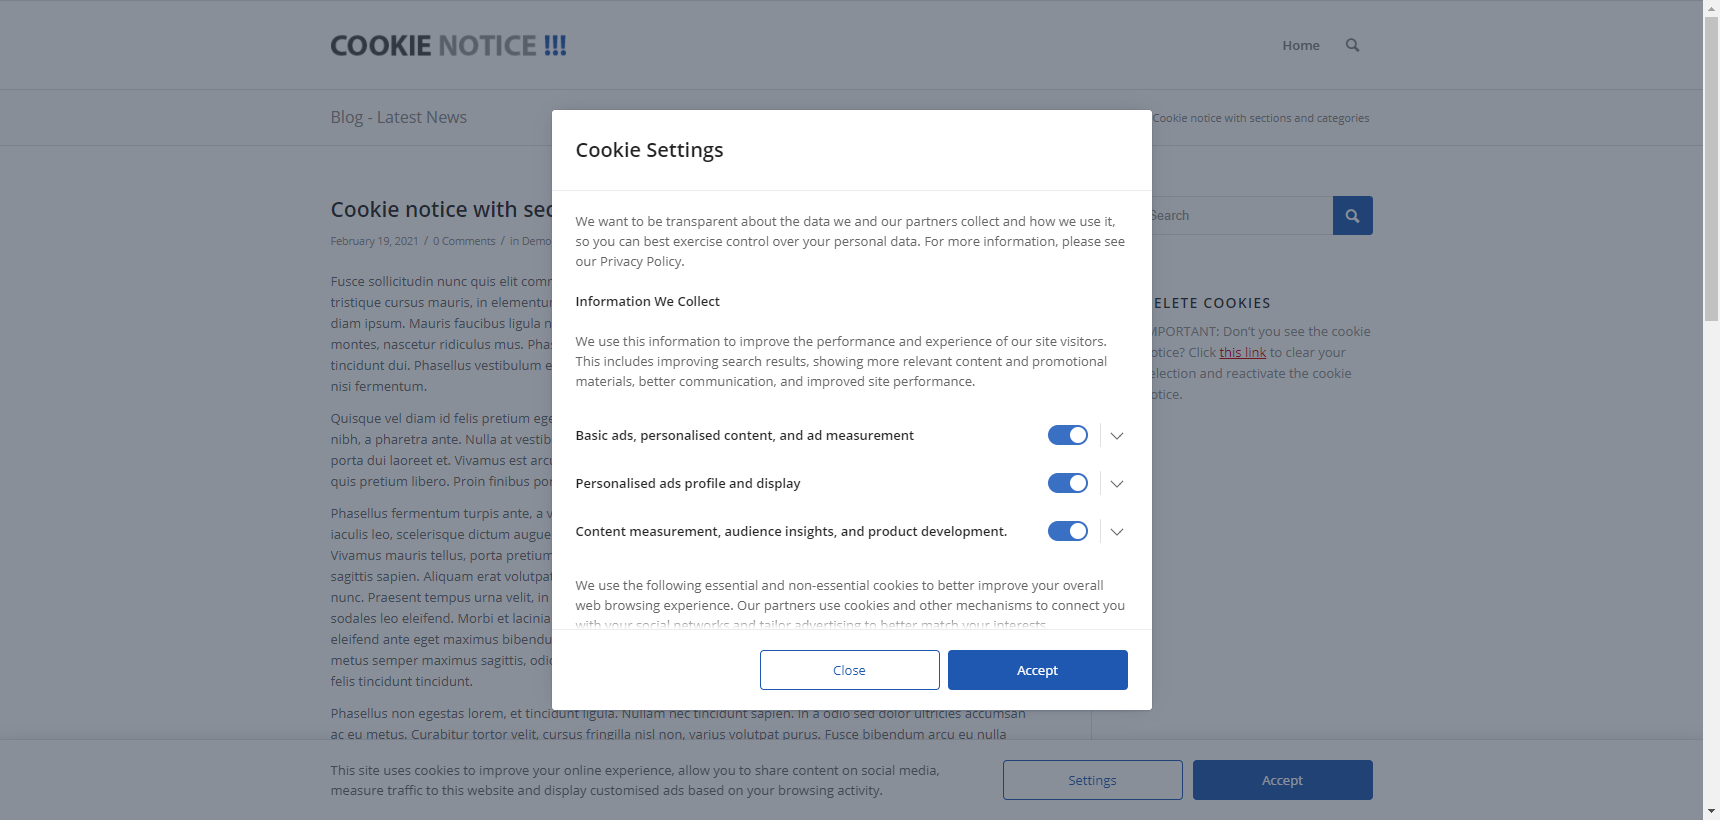 The modal window used to configure the cookie preferences in the front-end of the WordPress site.